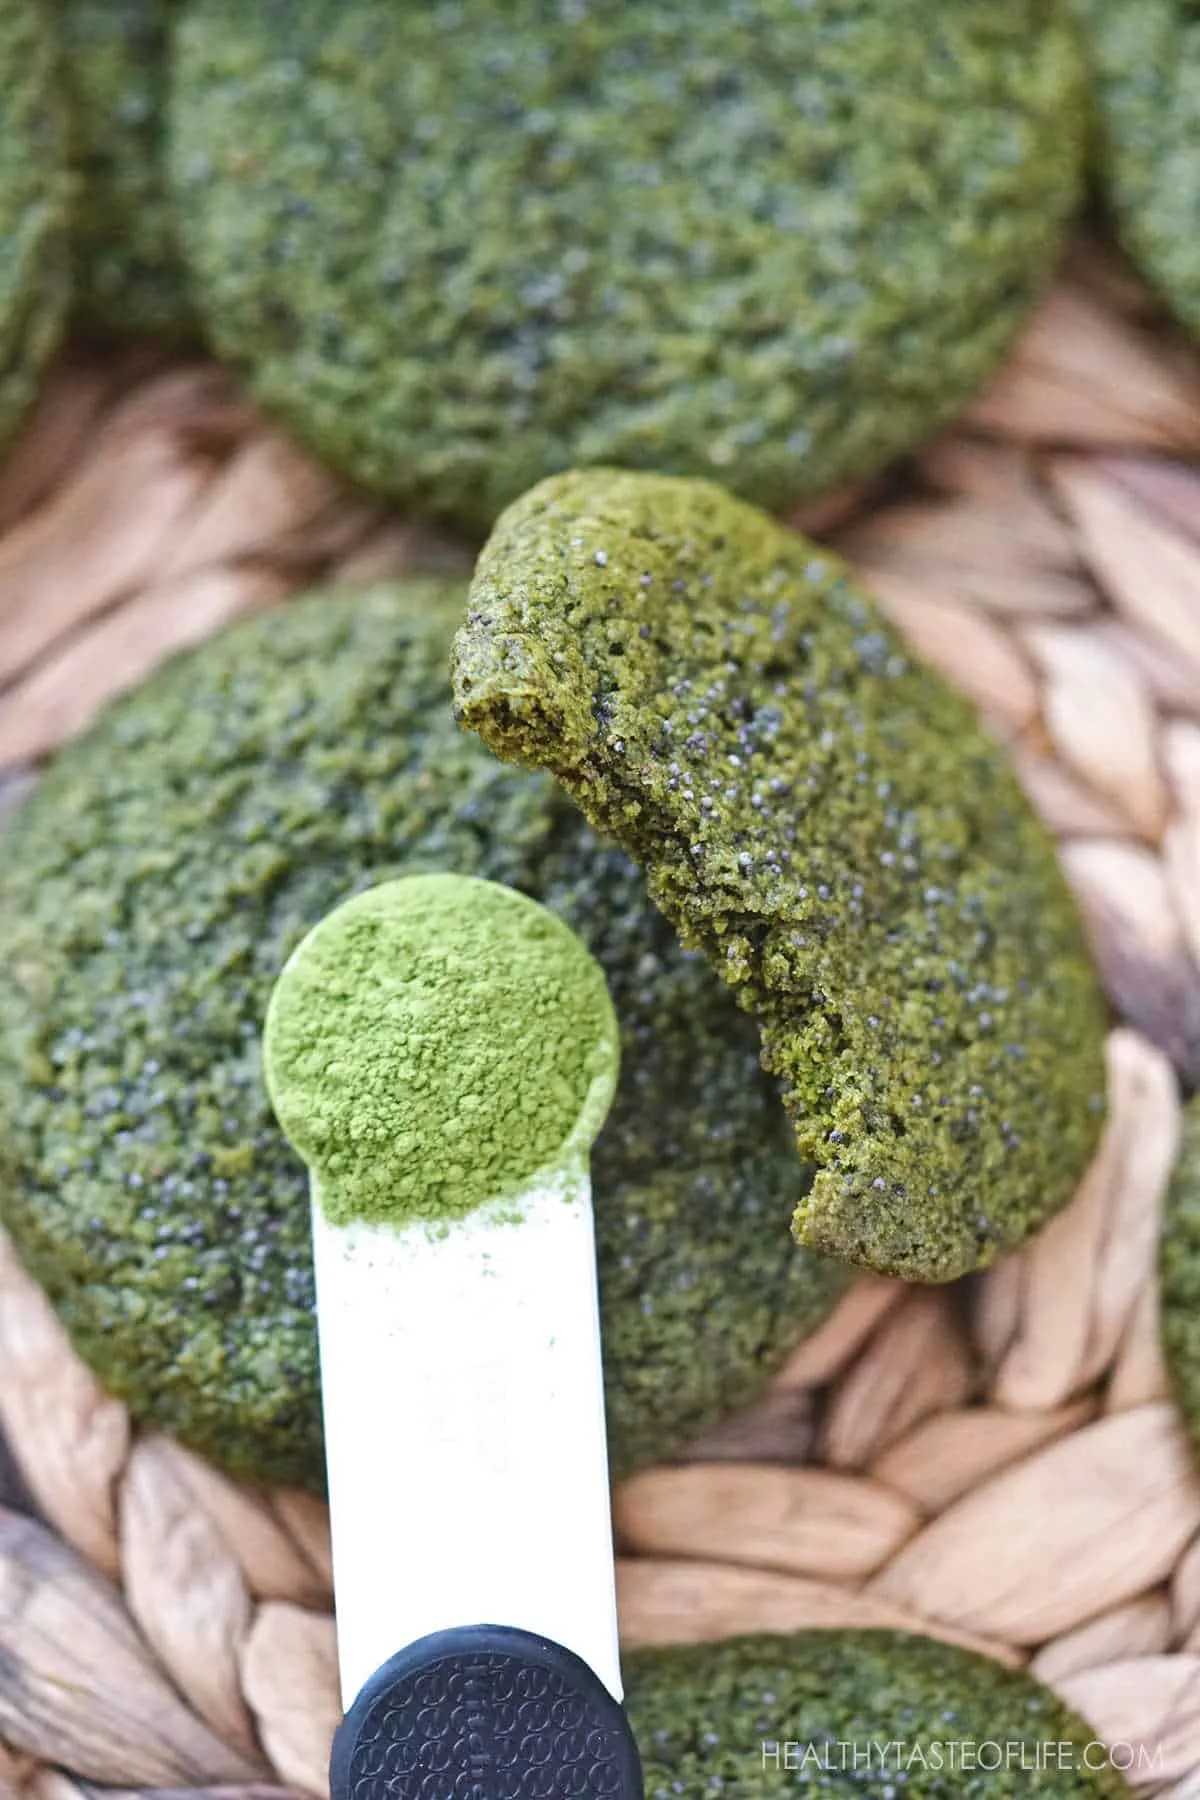 Choose the best matcha powder for making healthy matcha cookies. These vegan matcha cookies are made with ceremonial grade matcha, flax seeds,  gluten free oatmeal, vegan butter and maple sugar: soft and chewy inside and crisp on the outside. #matcha #cookies #healthy #glutenfree #oatmeal #vegan